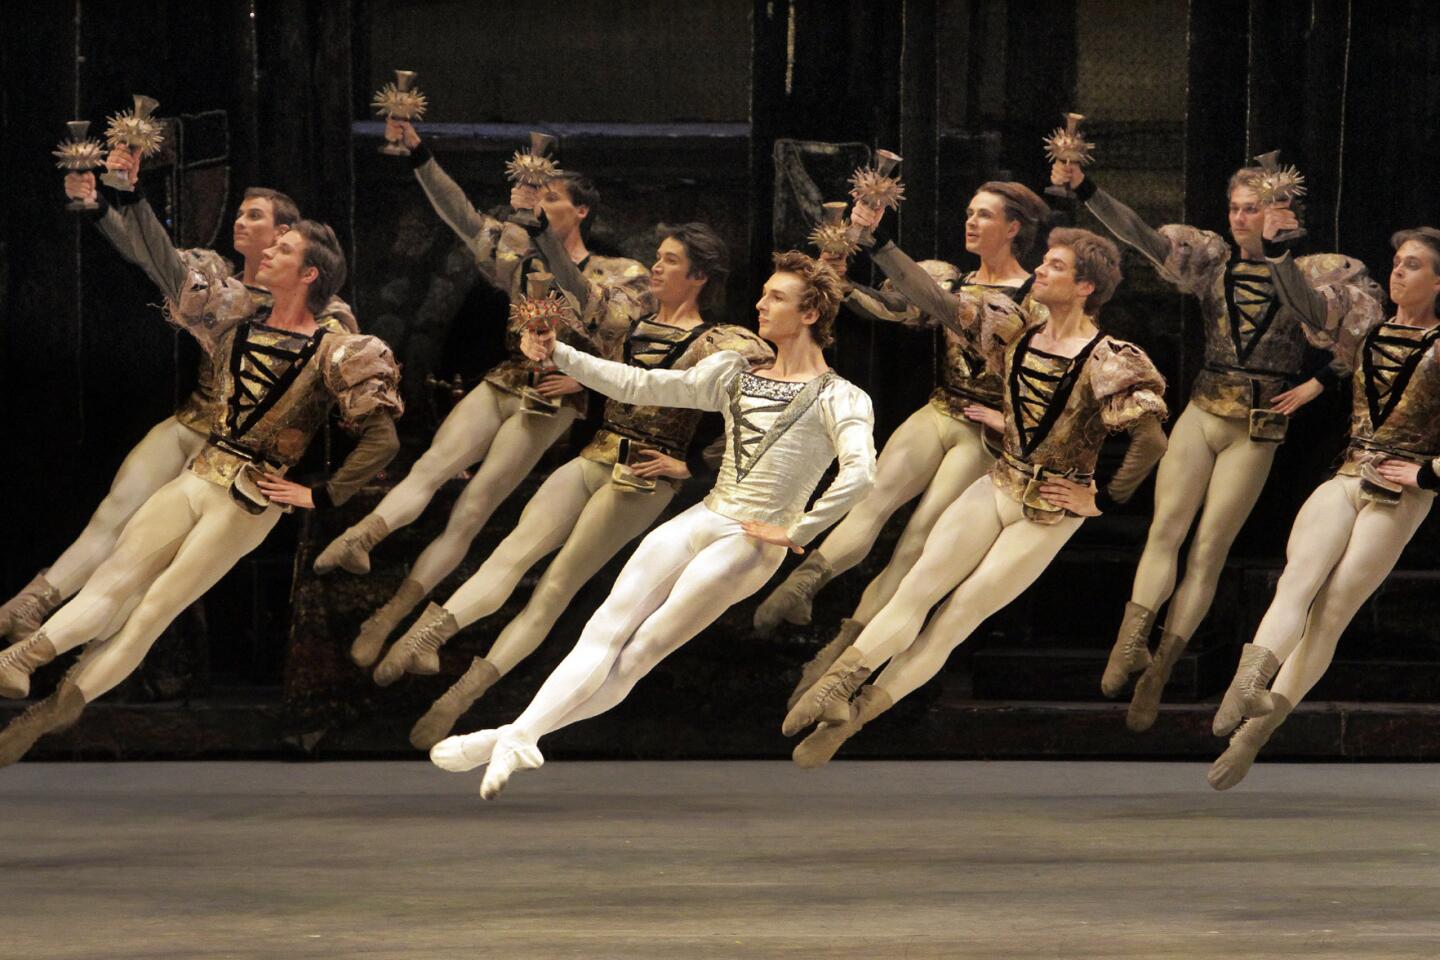 Arts and culture in pictures by The Times | Bolshoi's 'Swan Lake'